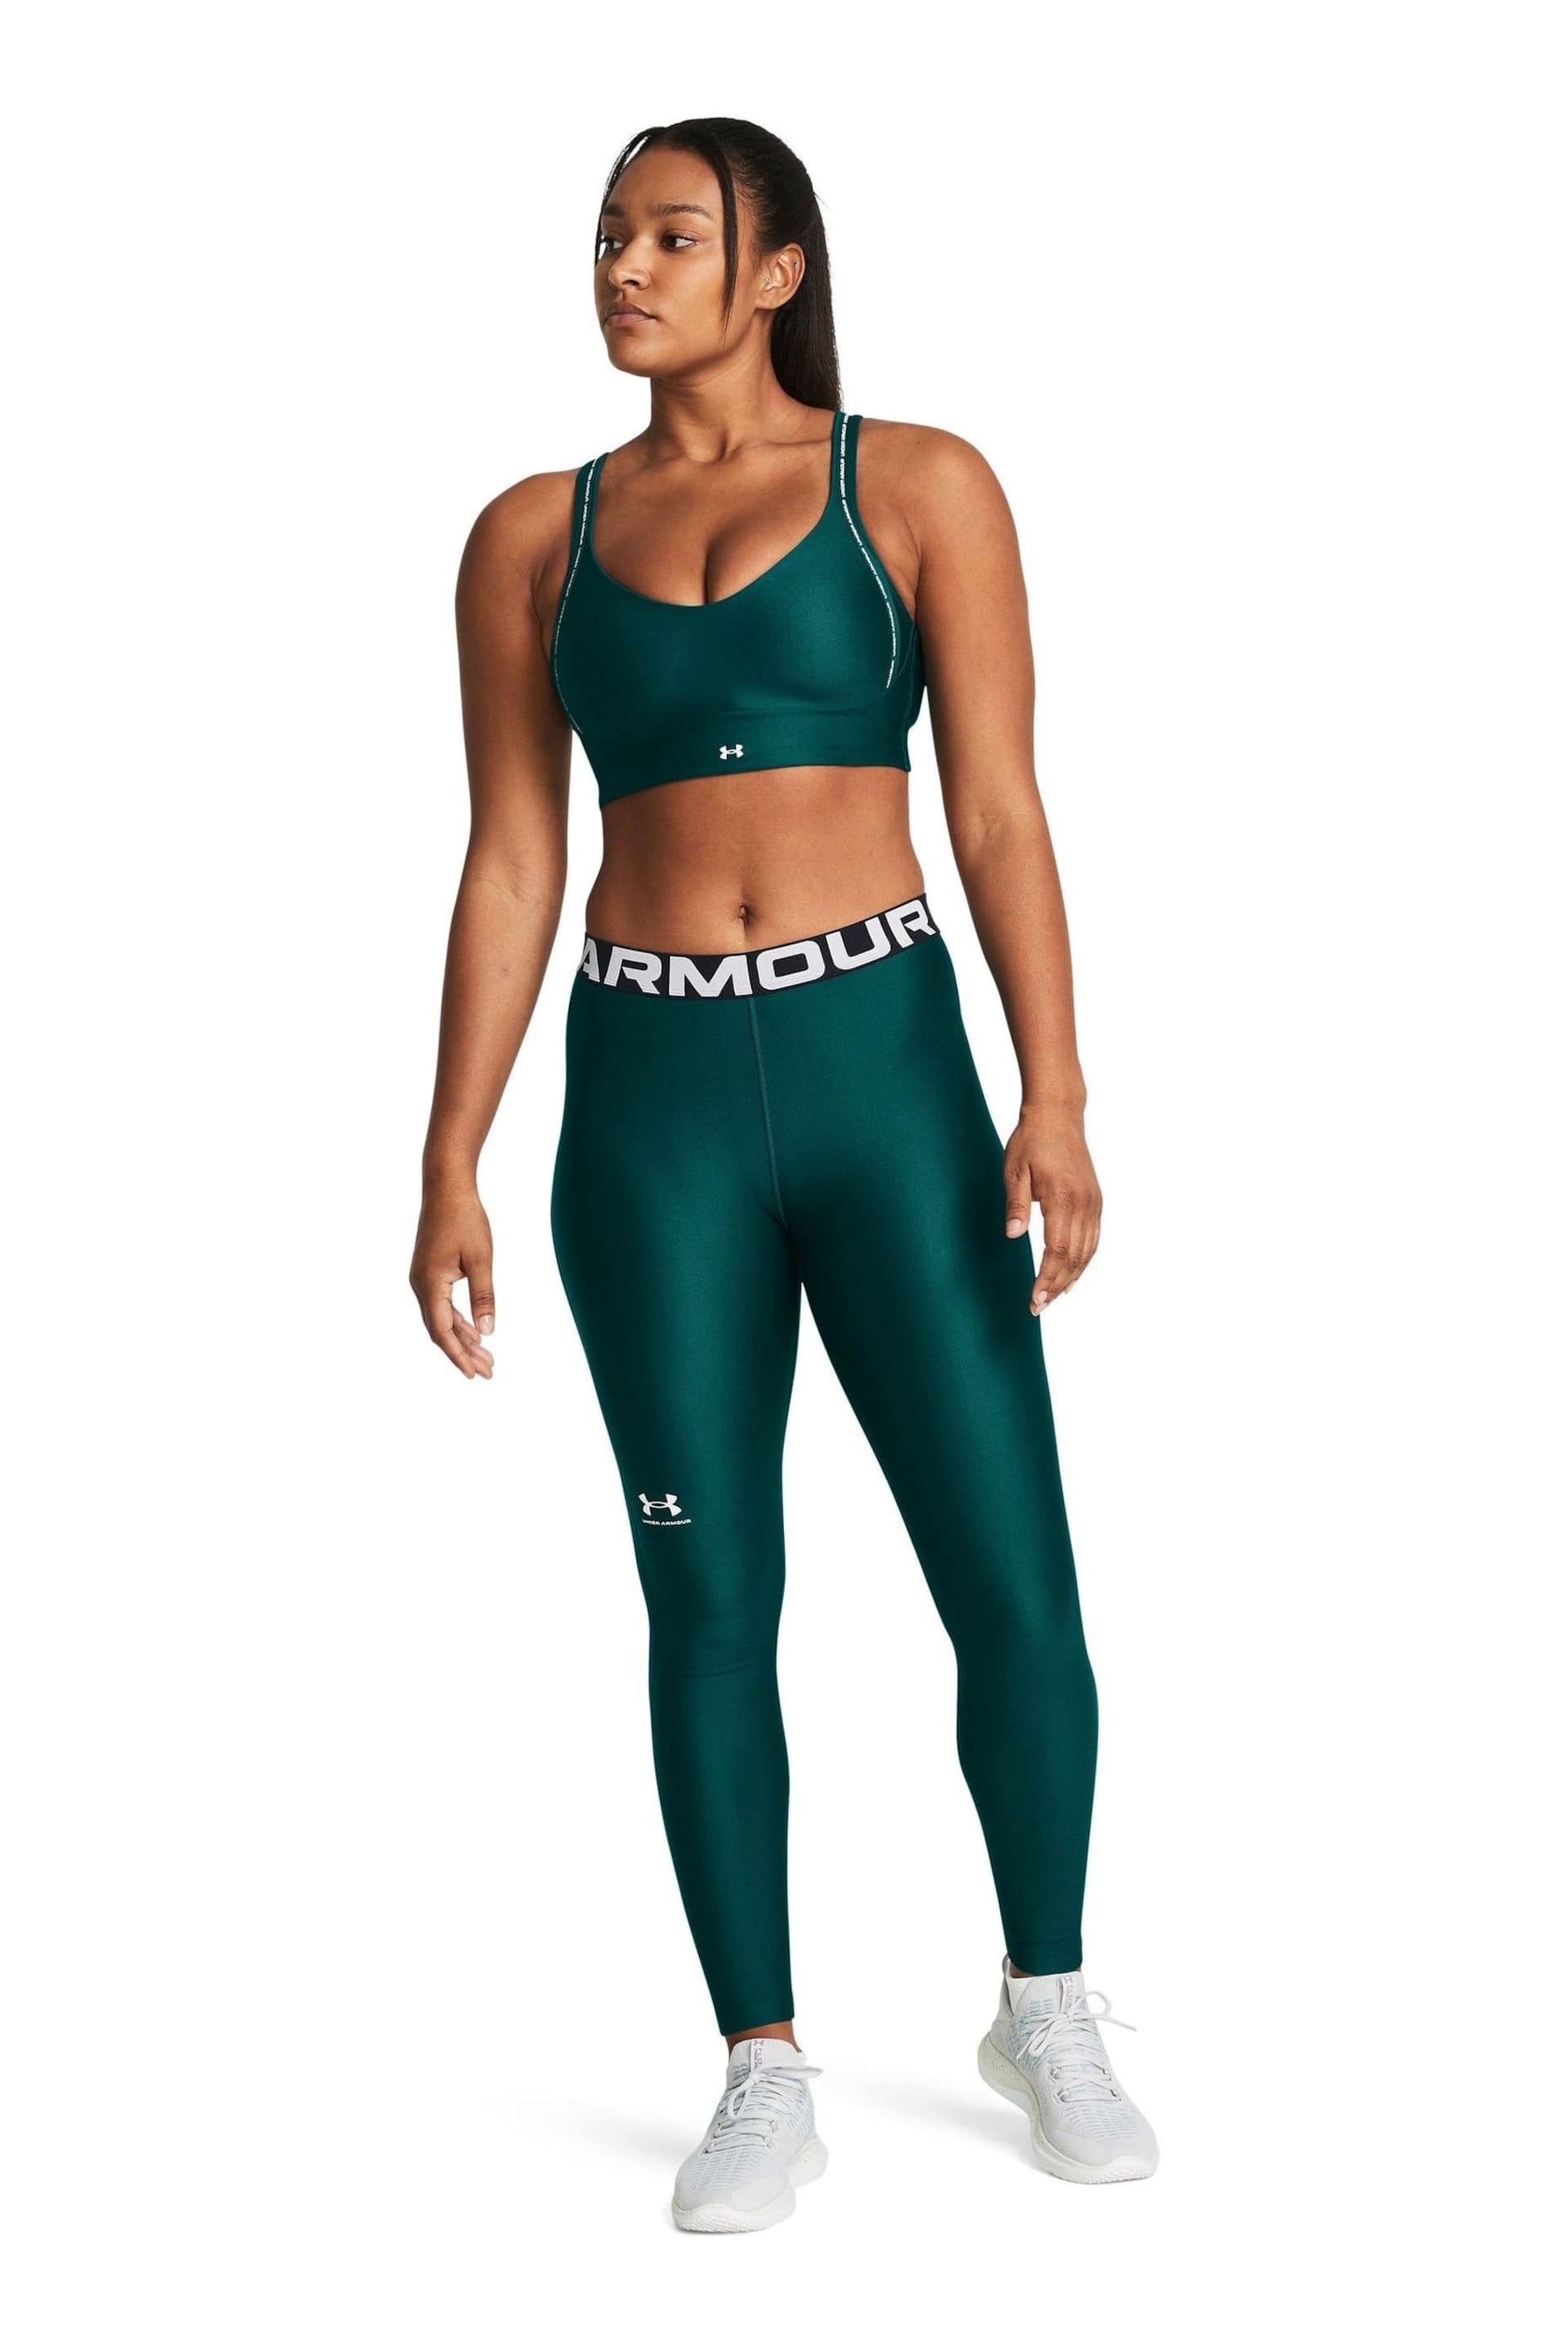 Under Armour Green Womens Heat Gear Authentics Leggings - Image 3 of 8